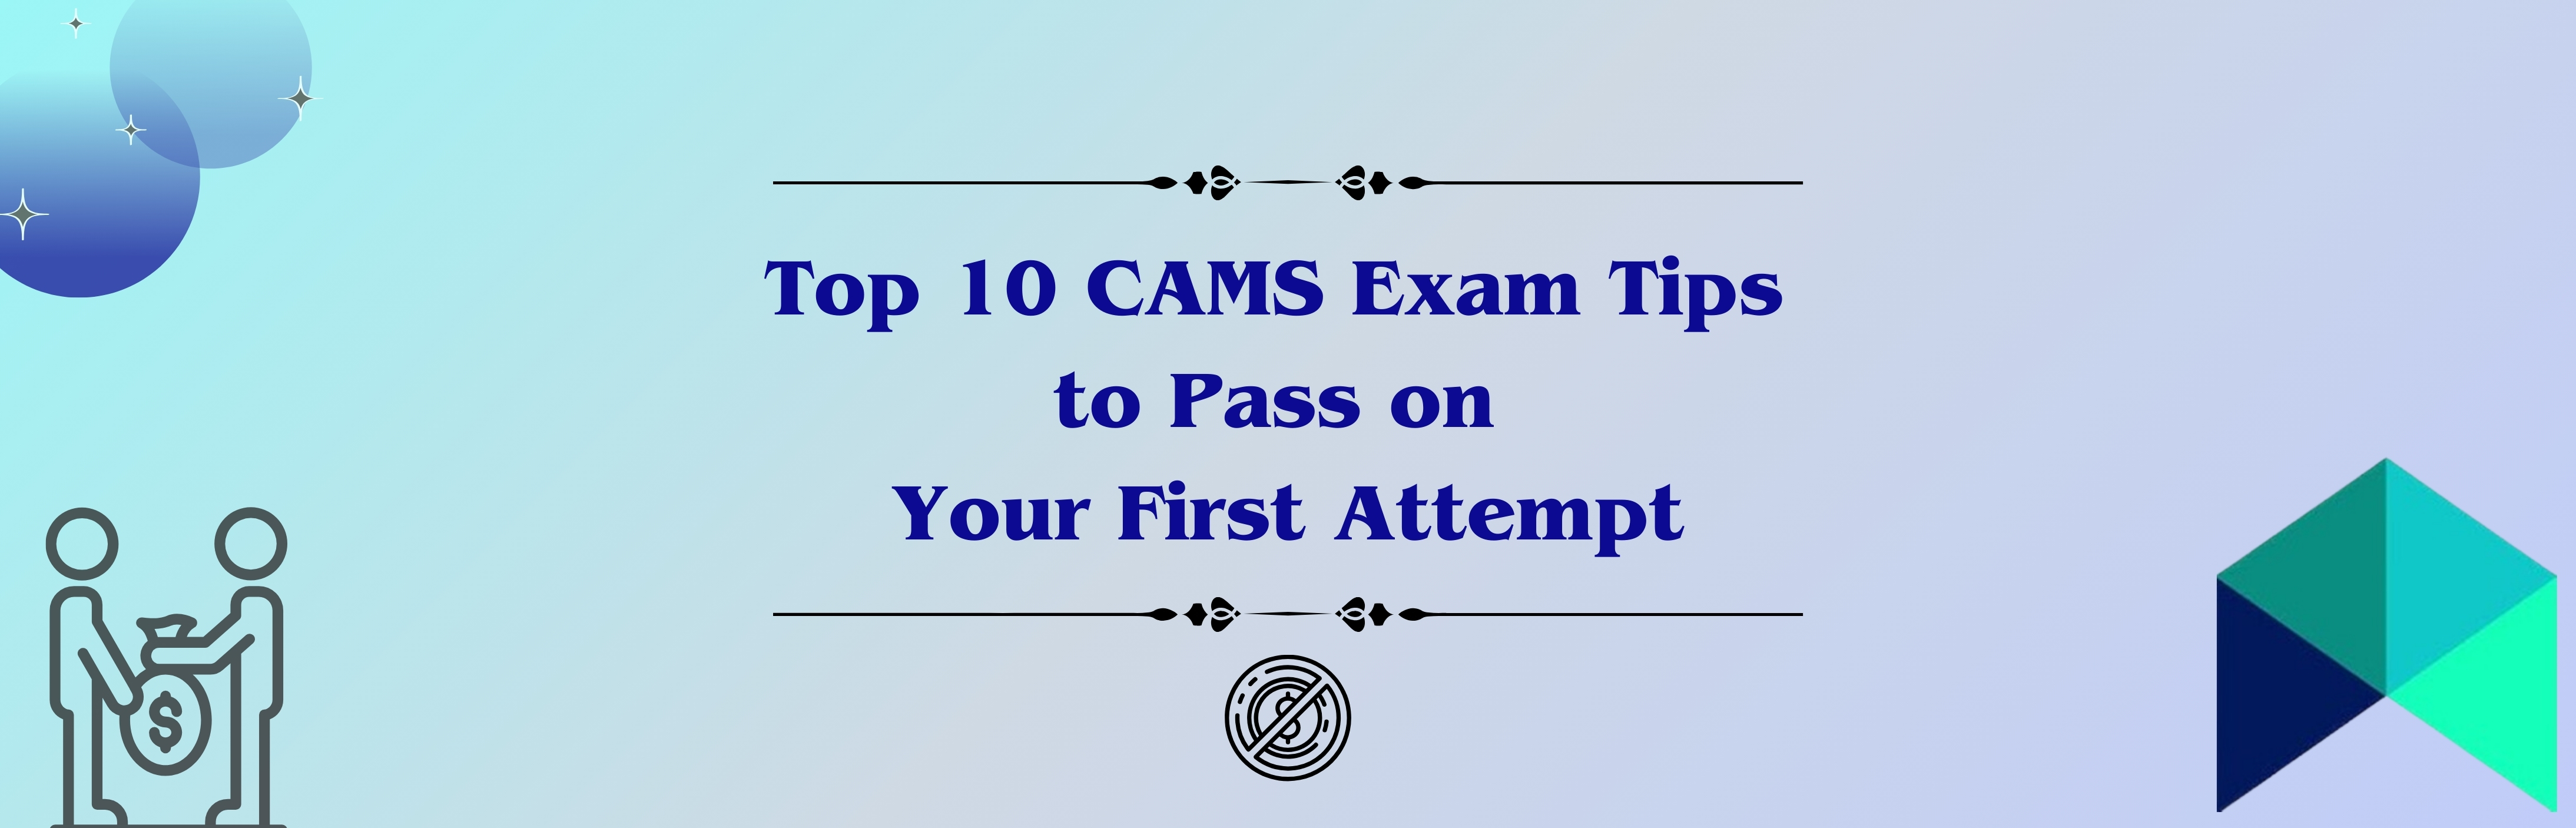 Top 10 CAMS Exam Tips to Pass on Your First Attempt